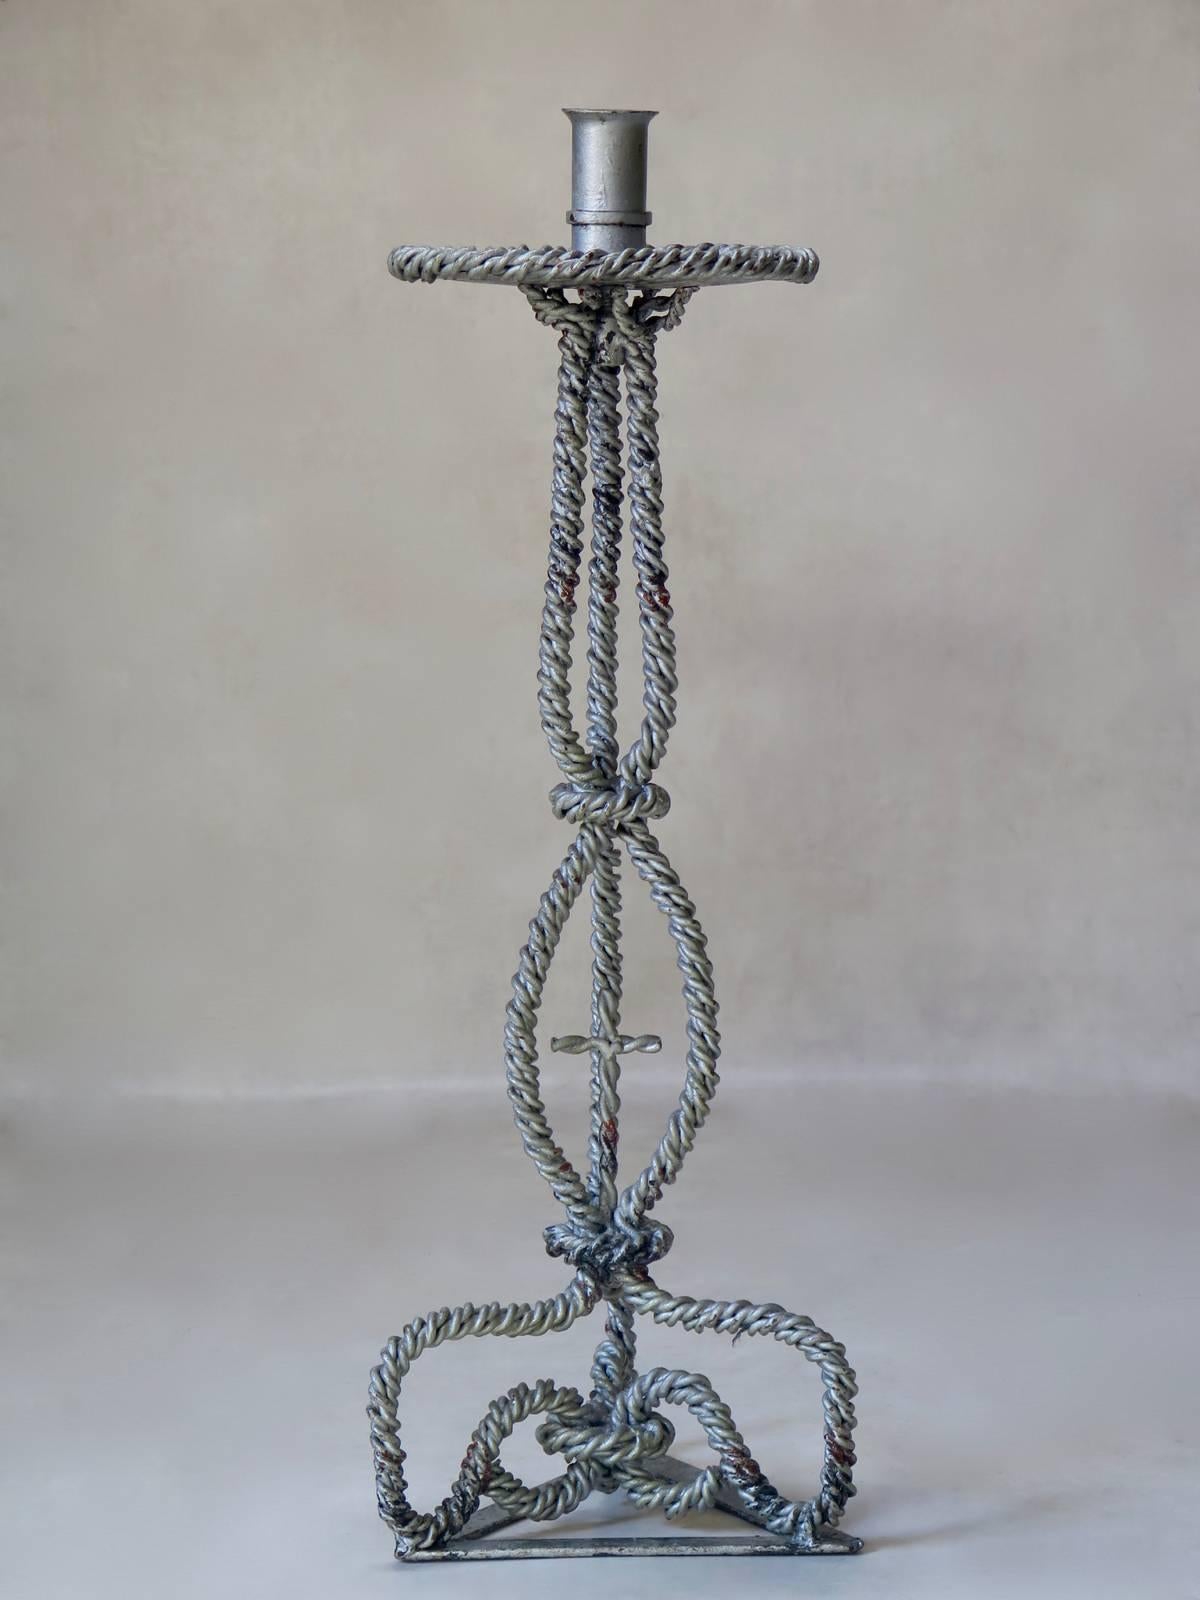 Unusual Folk Art candleholder made of twisted iron, painted silver. Triangular base, adorned with a cross.